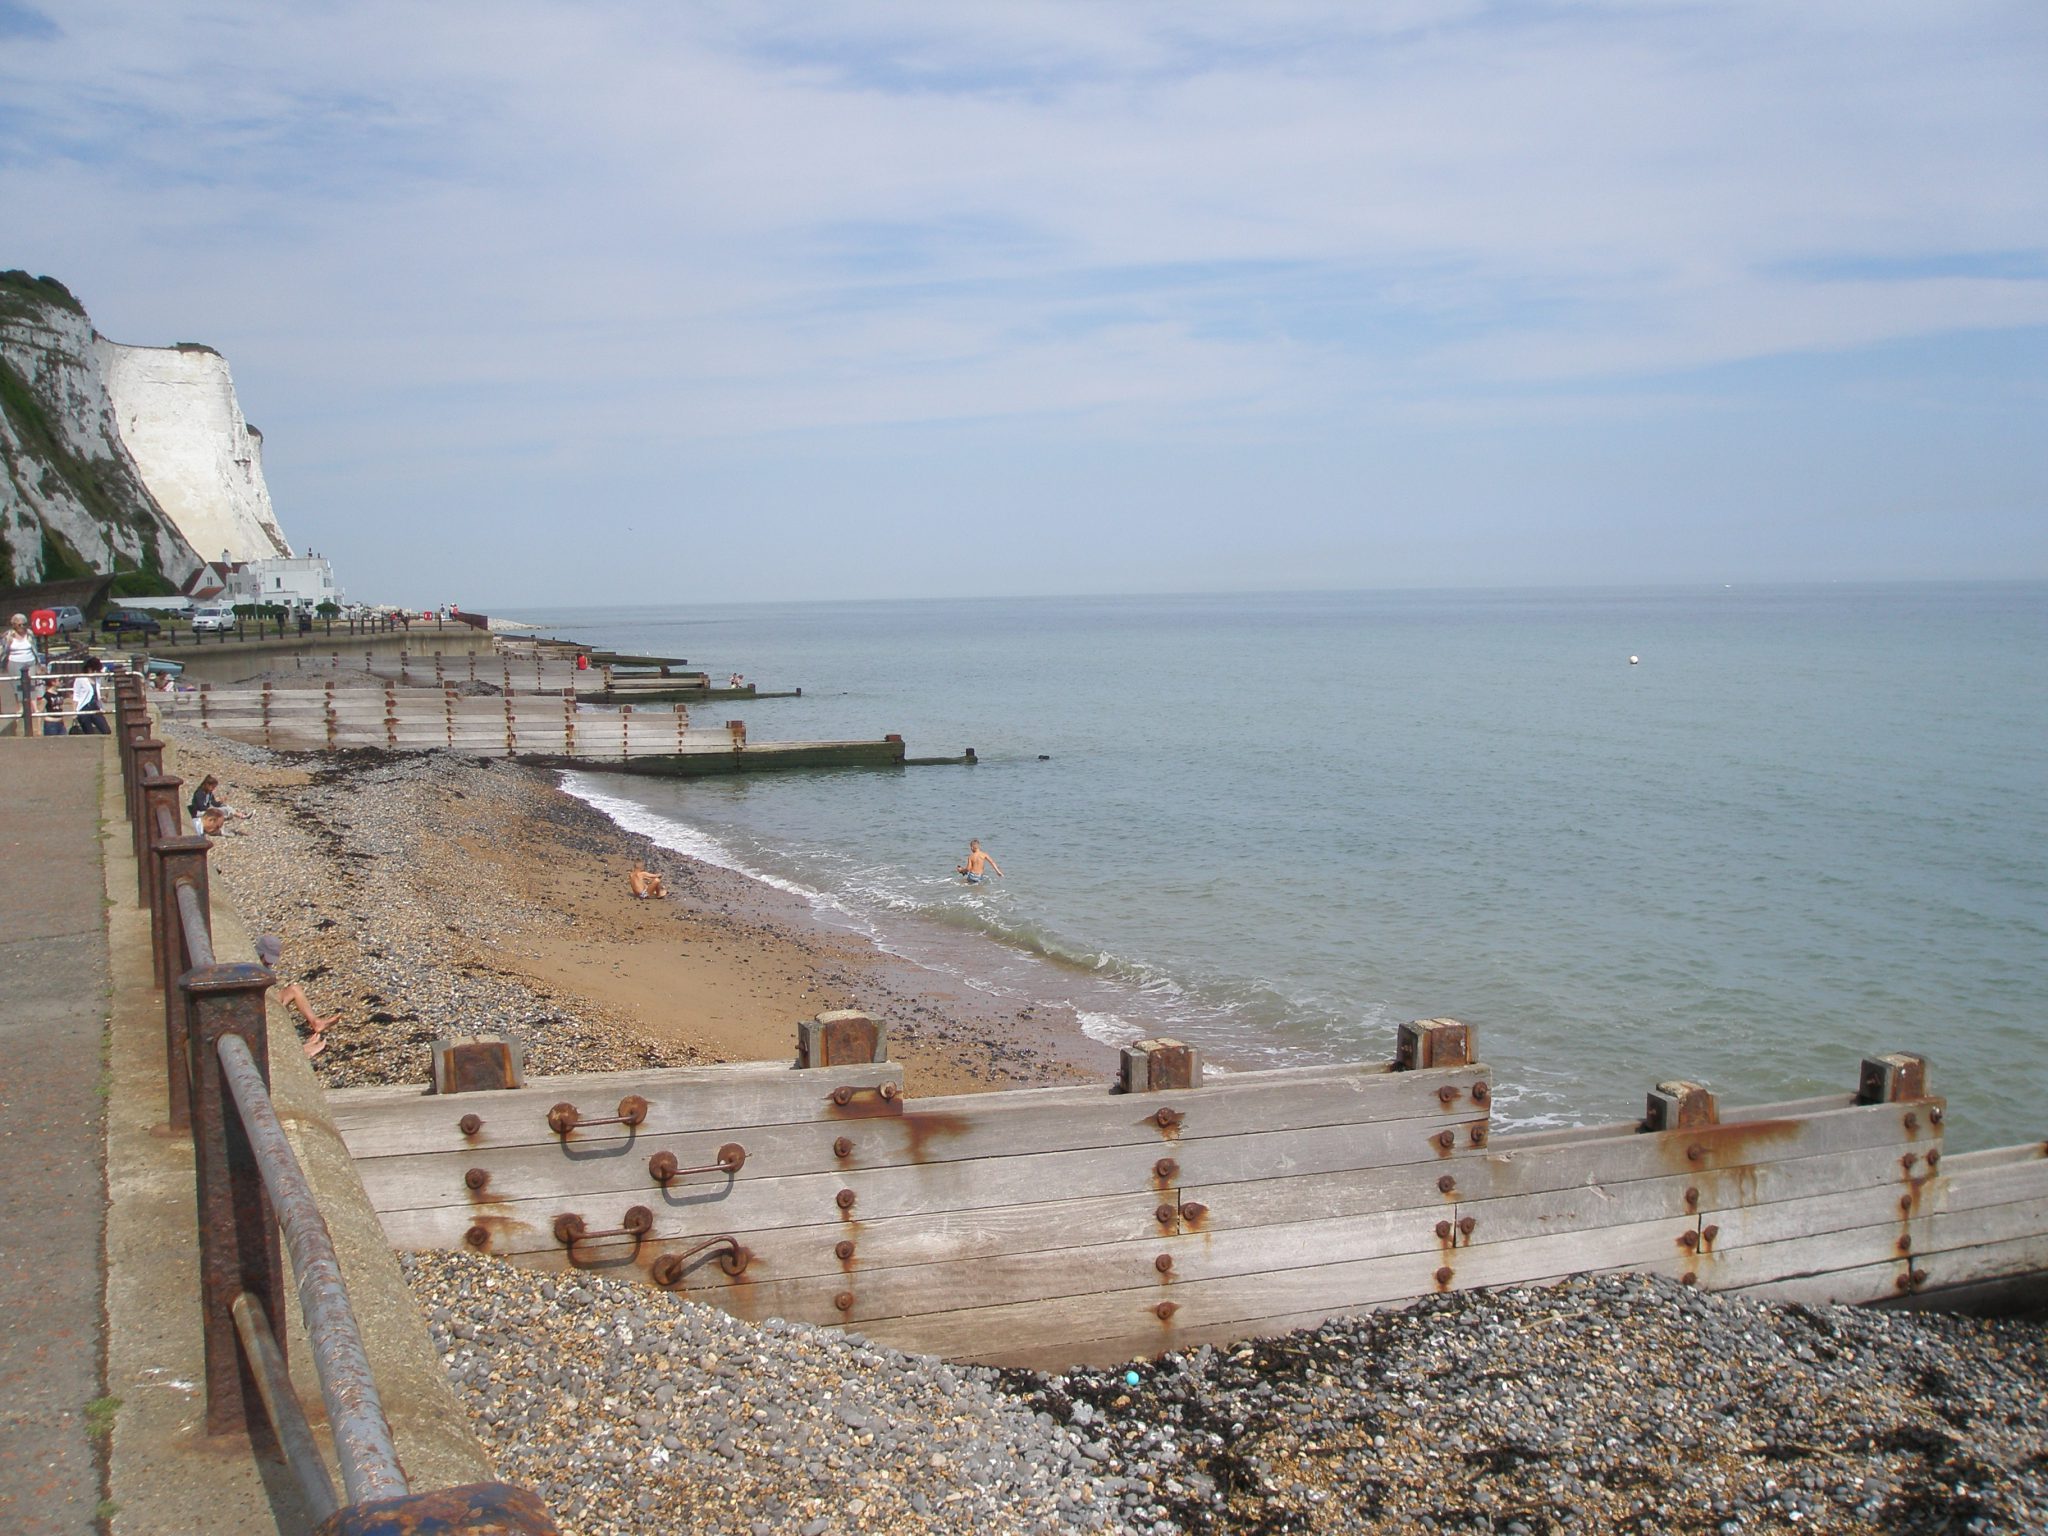 A closer look at the Groynes